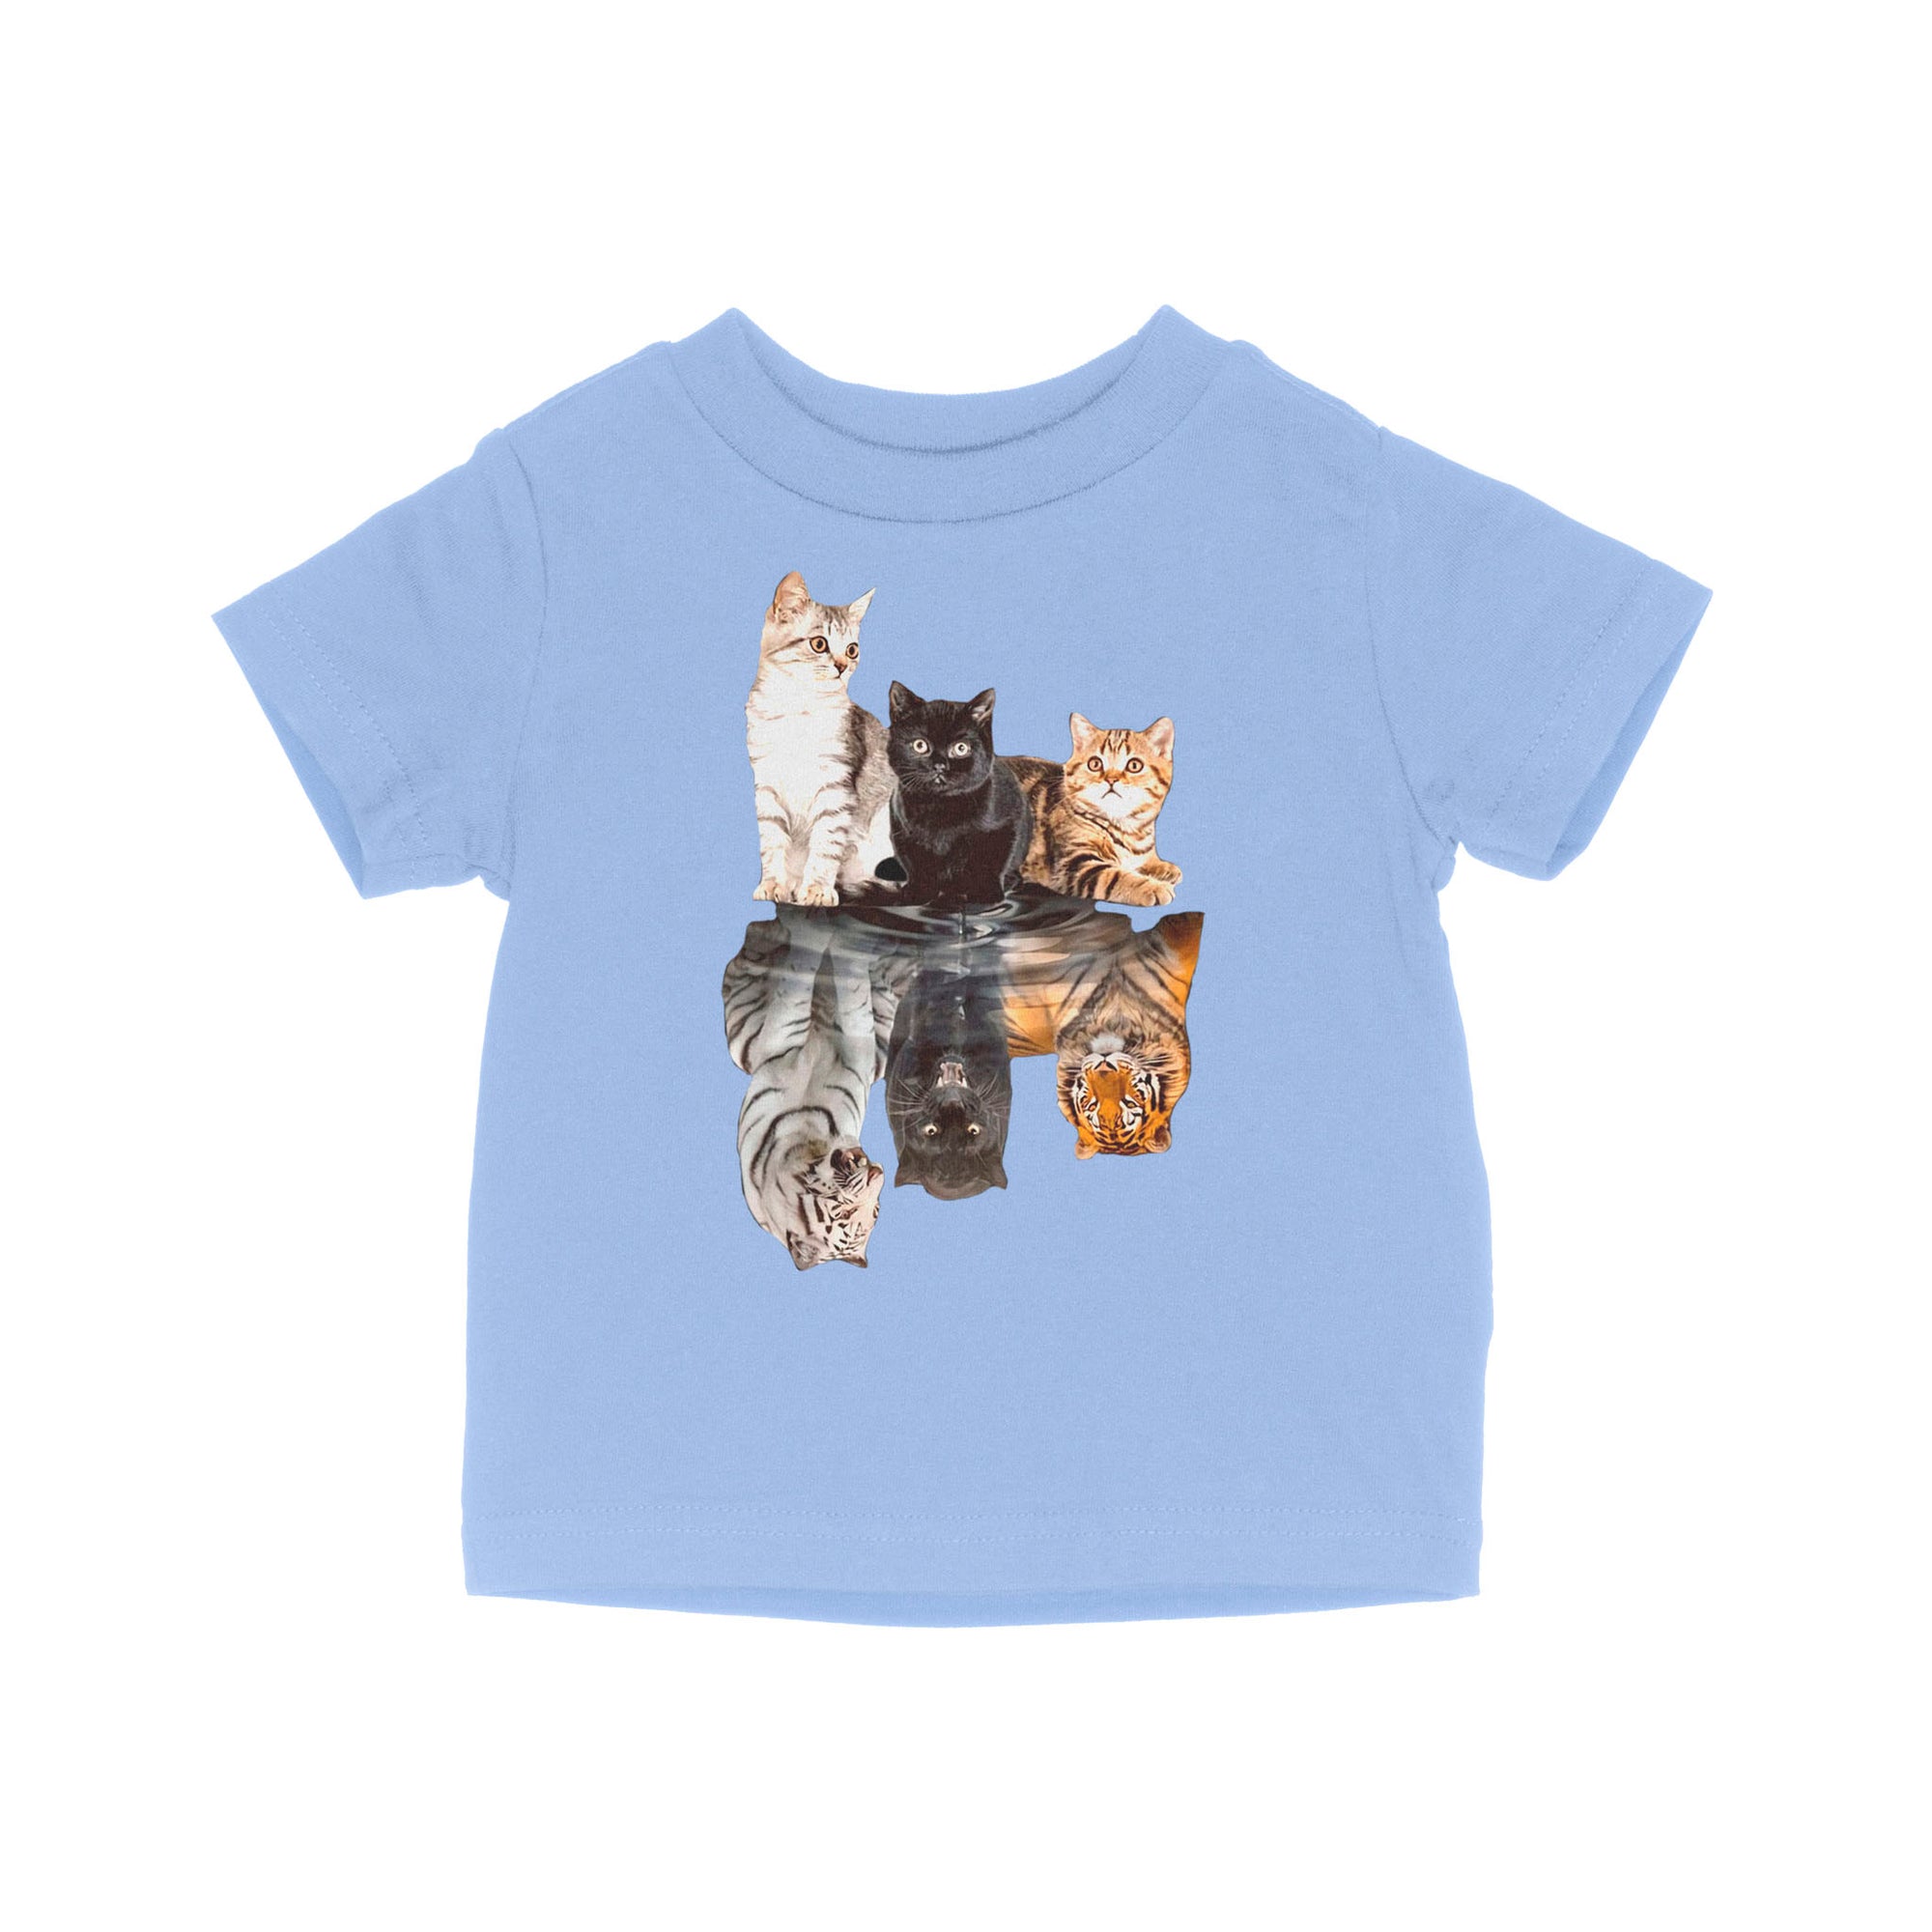 The Cats Water Mirror Reflection Tigers - Baby T-Shirt